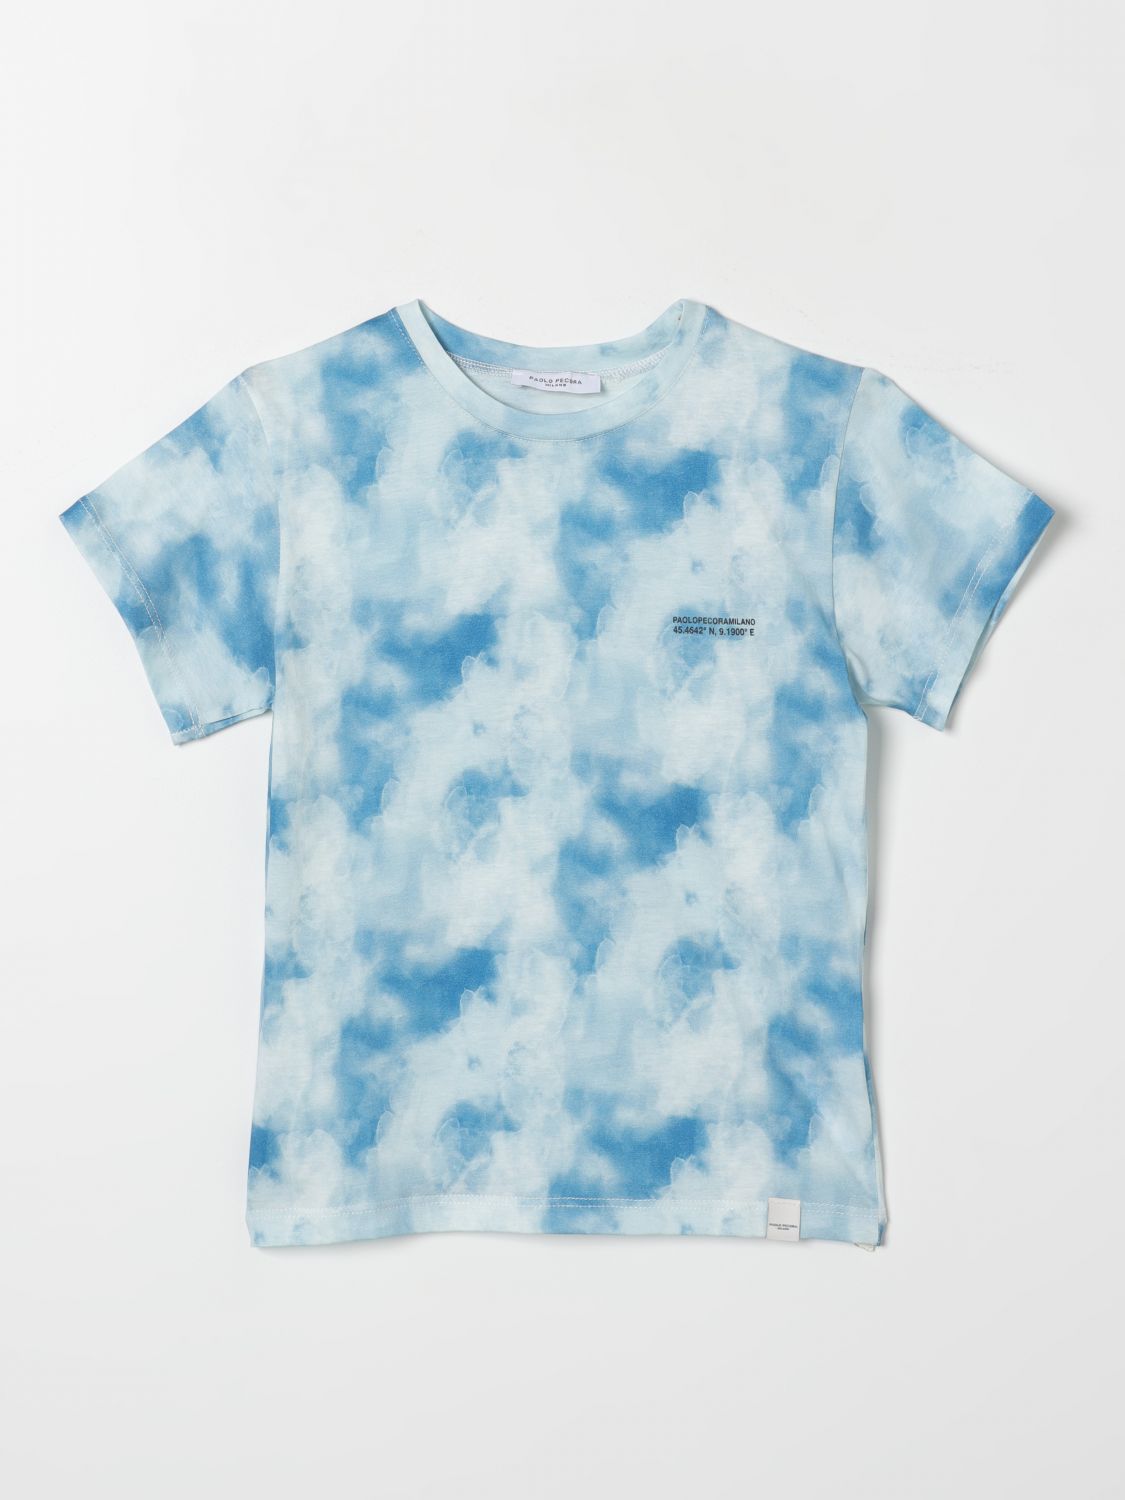 Paolo Pecora T-shirt  Kids Colour Dust In 灰褐色